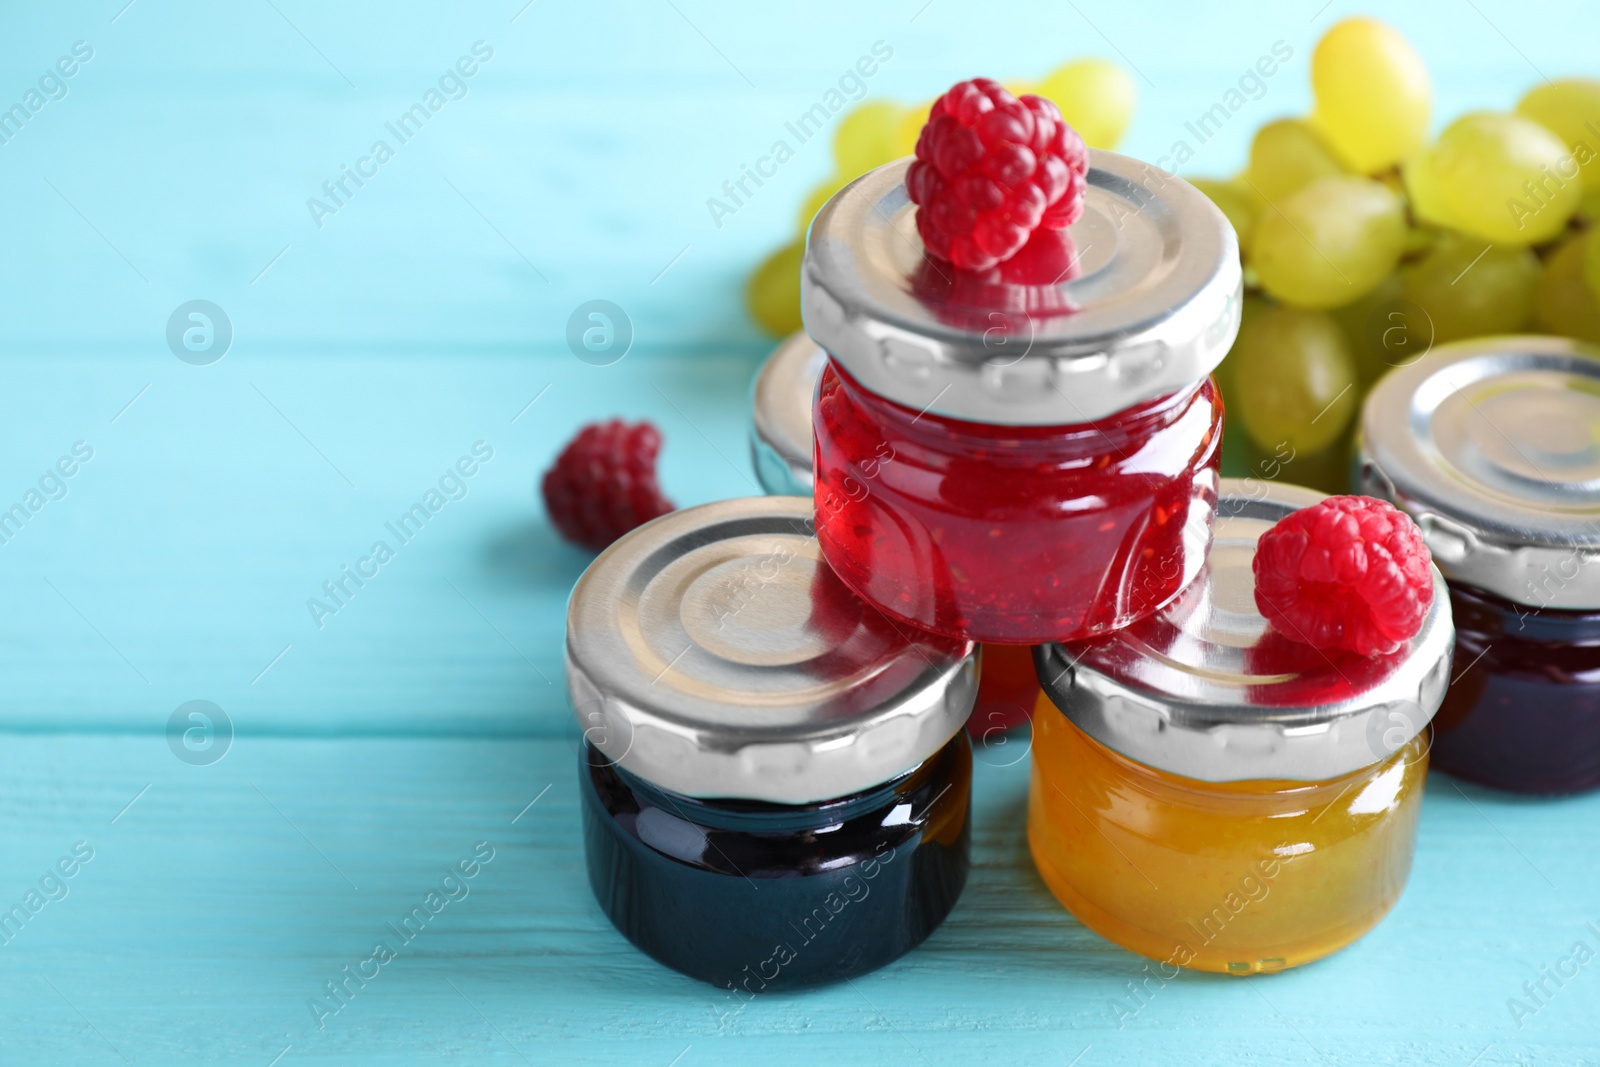 Image of Different jams in glass jars on turquoise table